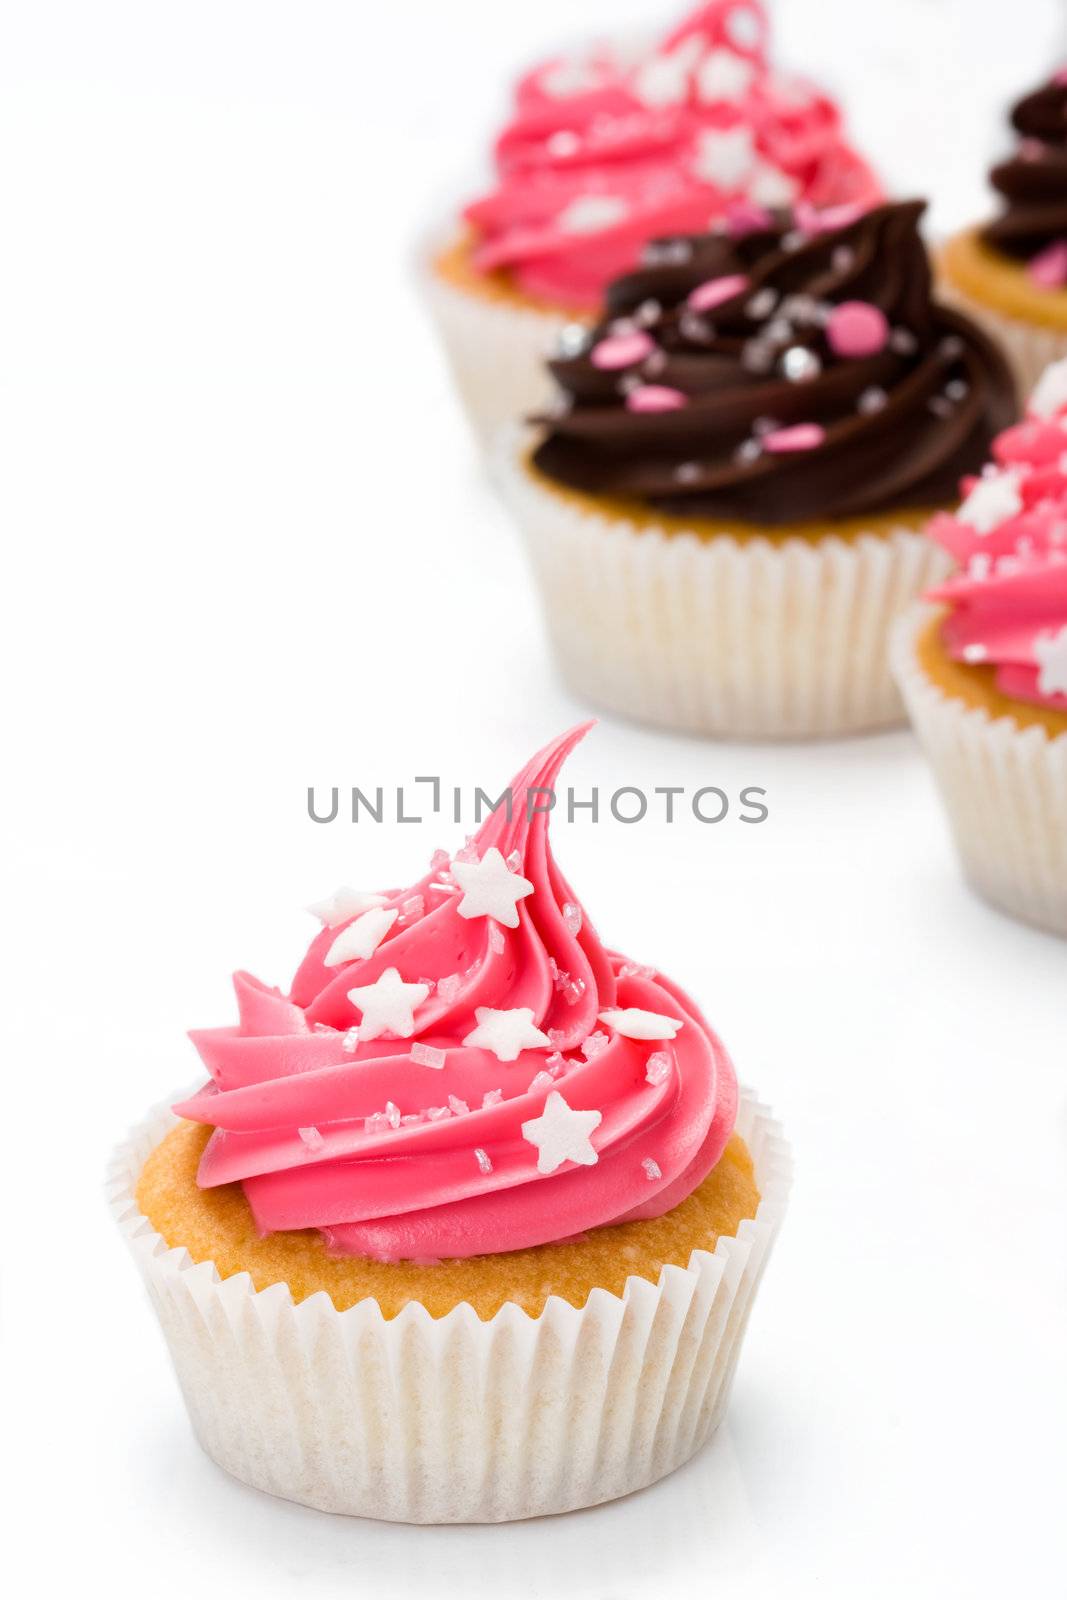 Assortment of cupcakes against a white background